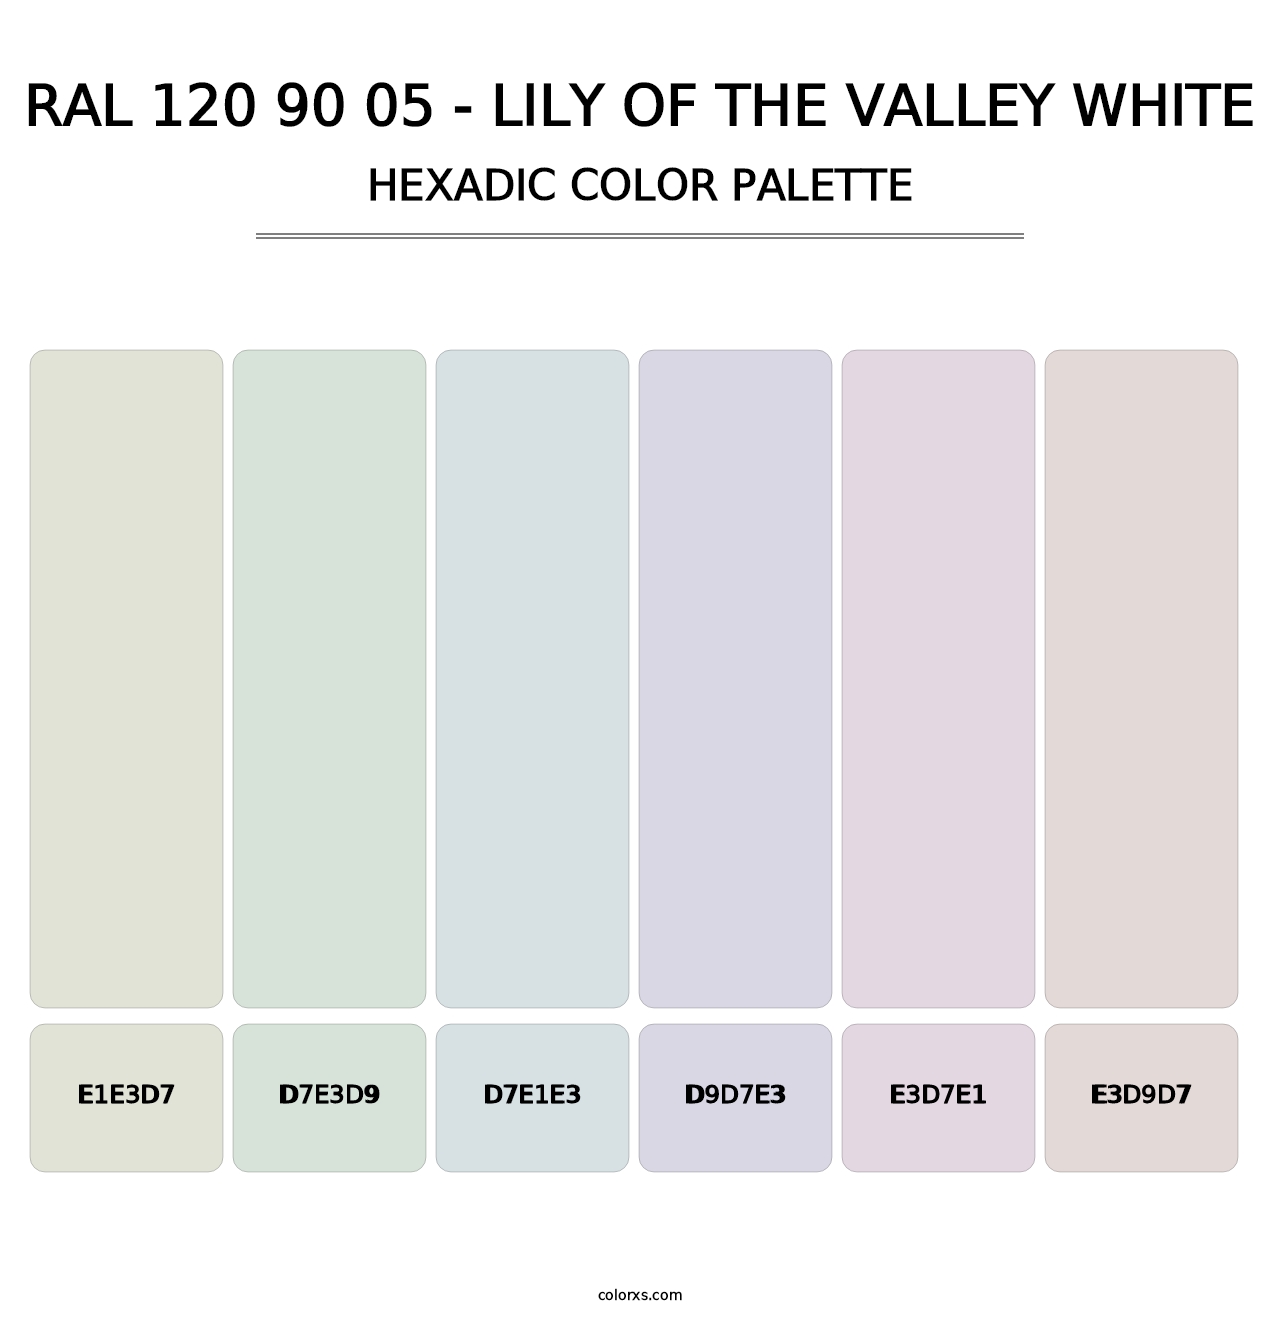 RAL 120 90 05 - Lily of the Valley White - Hexadic Color Palette